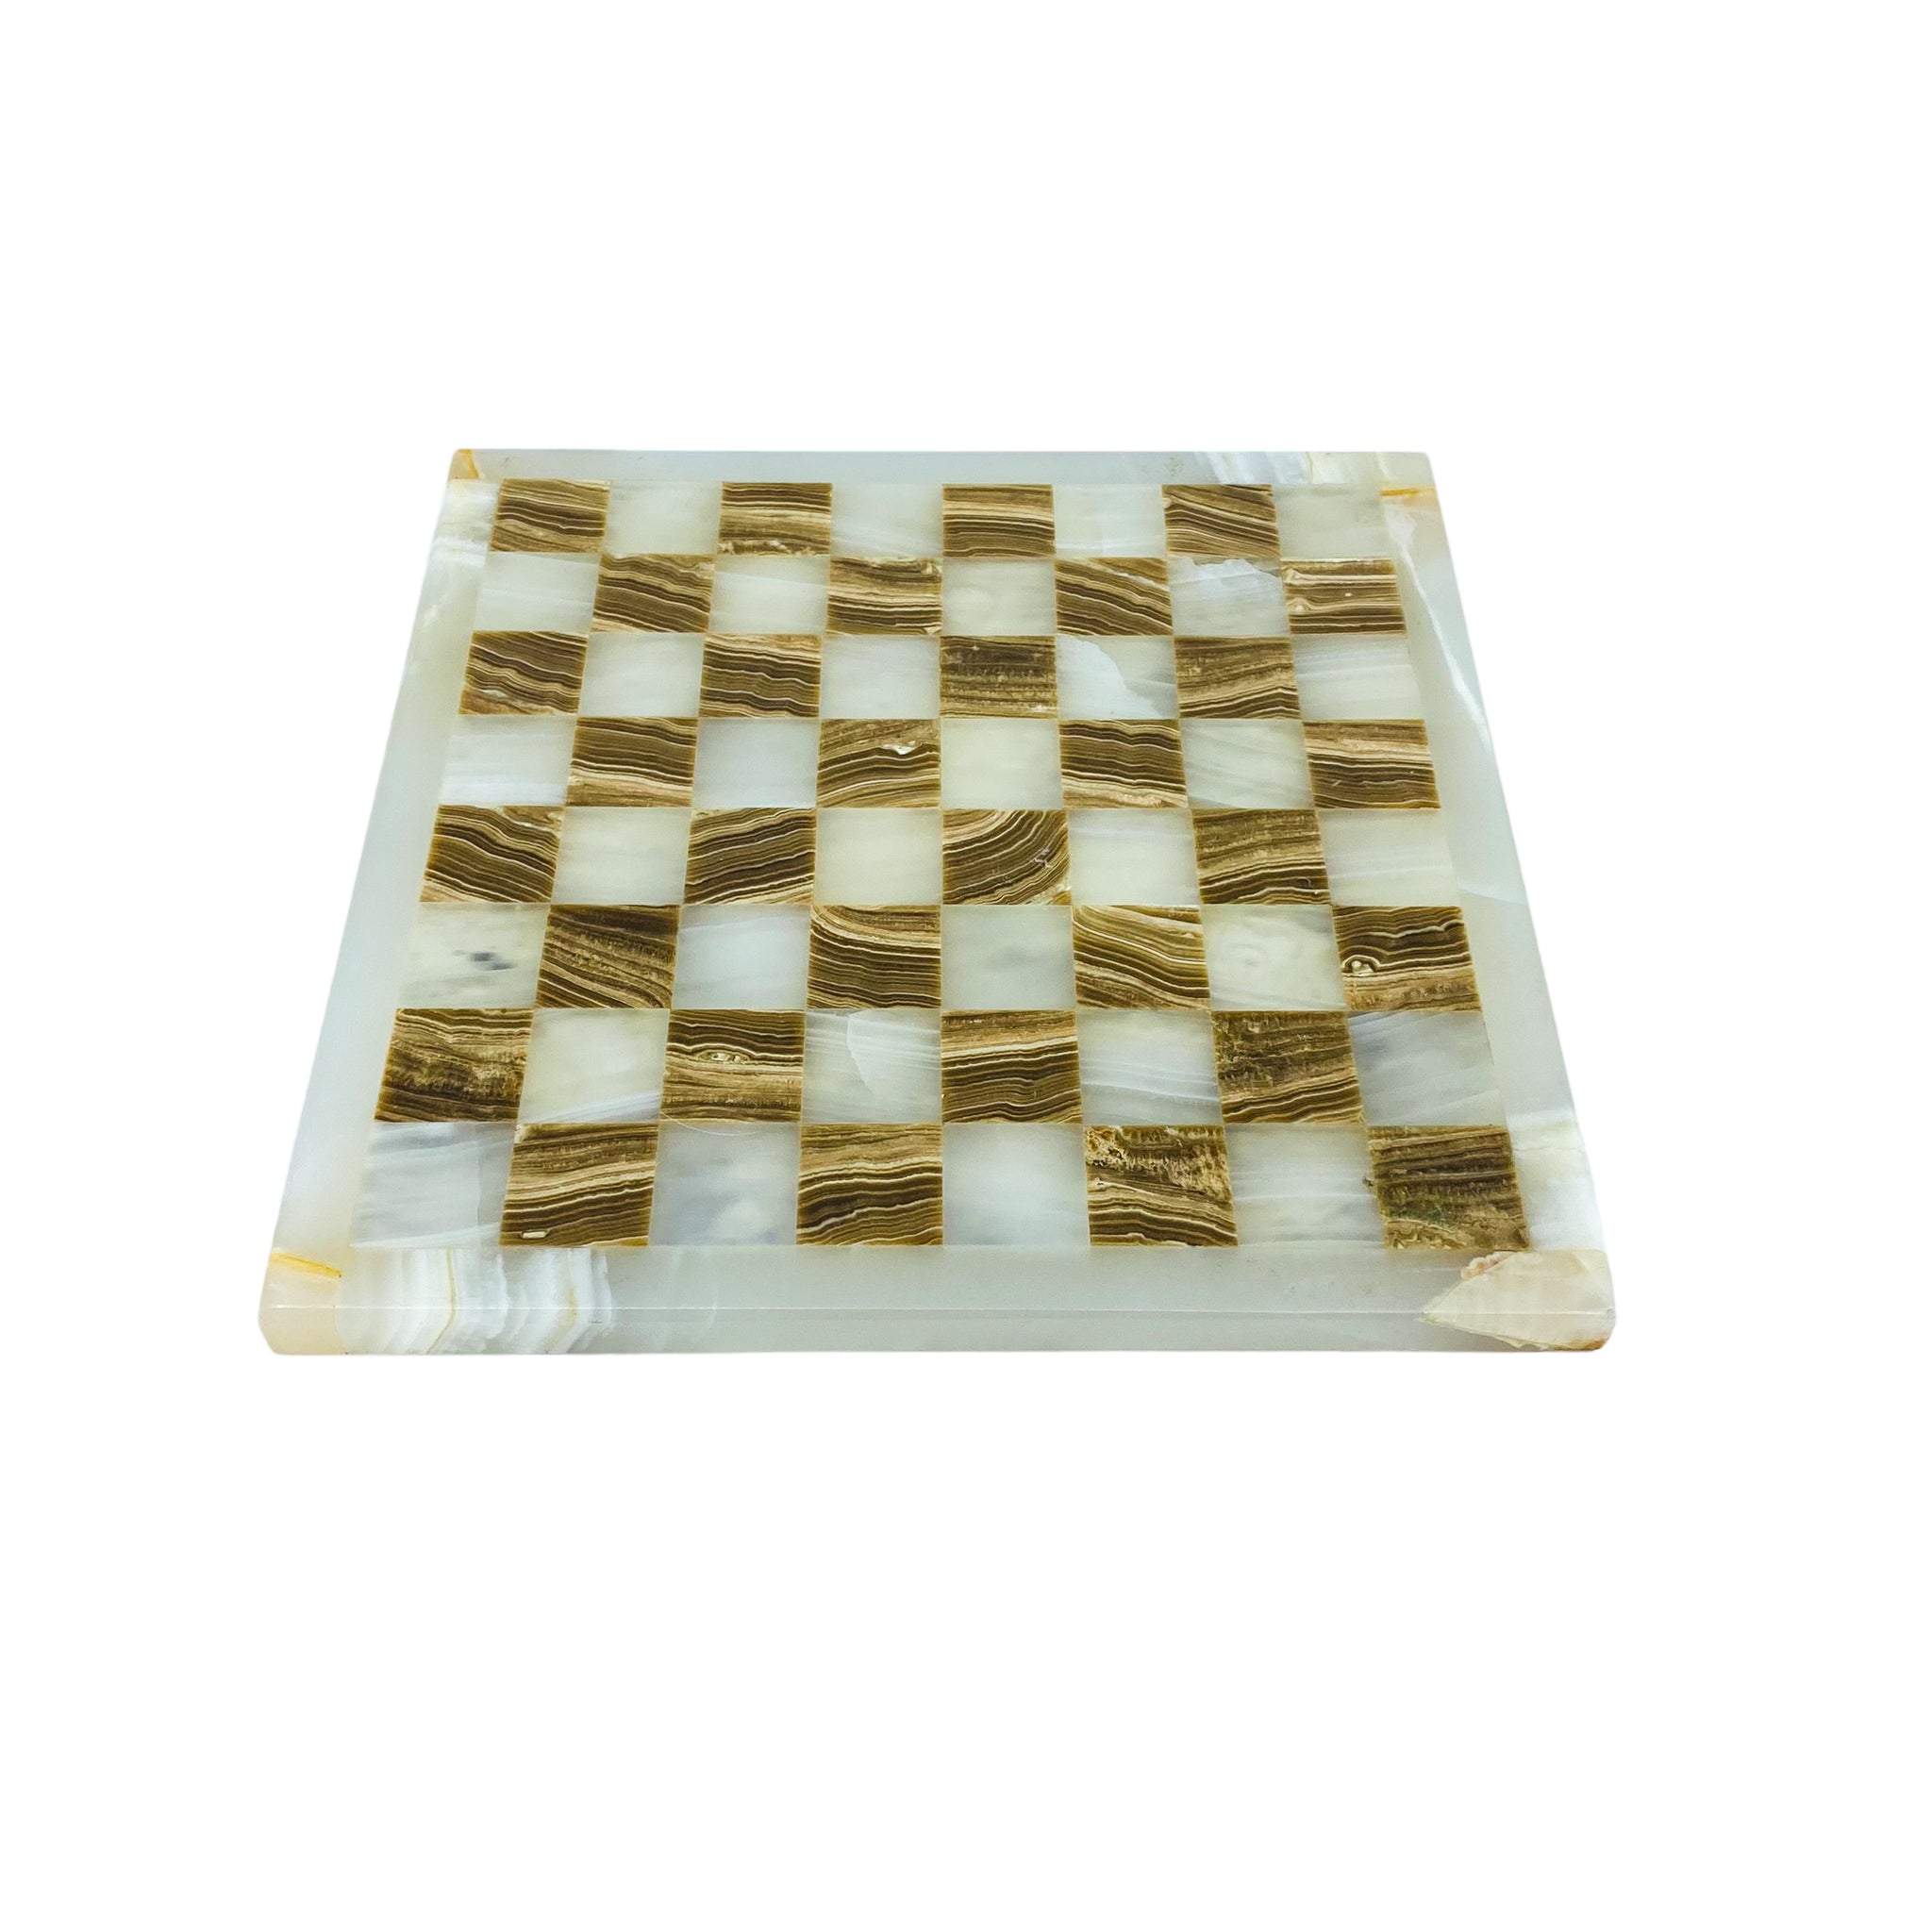 White and Onyx Marble Chessboard